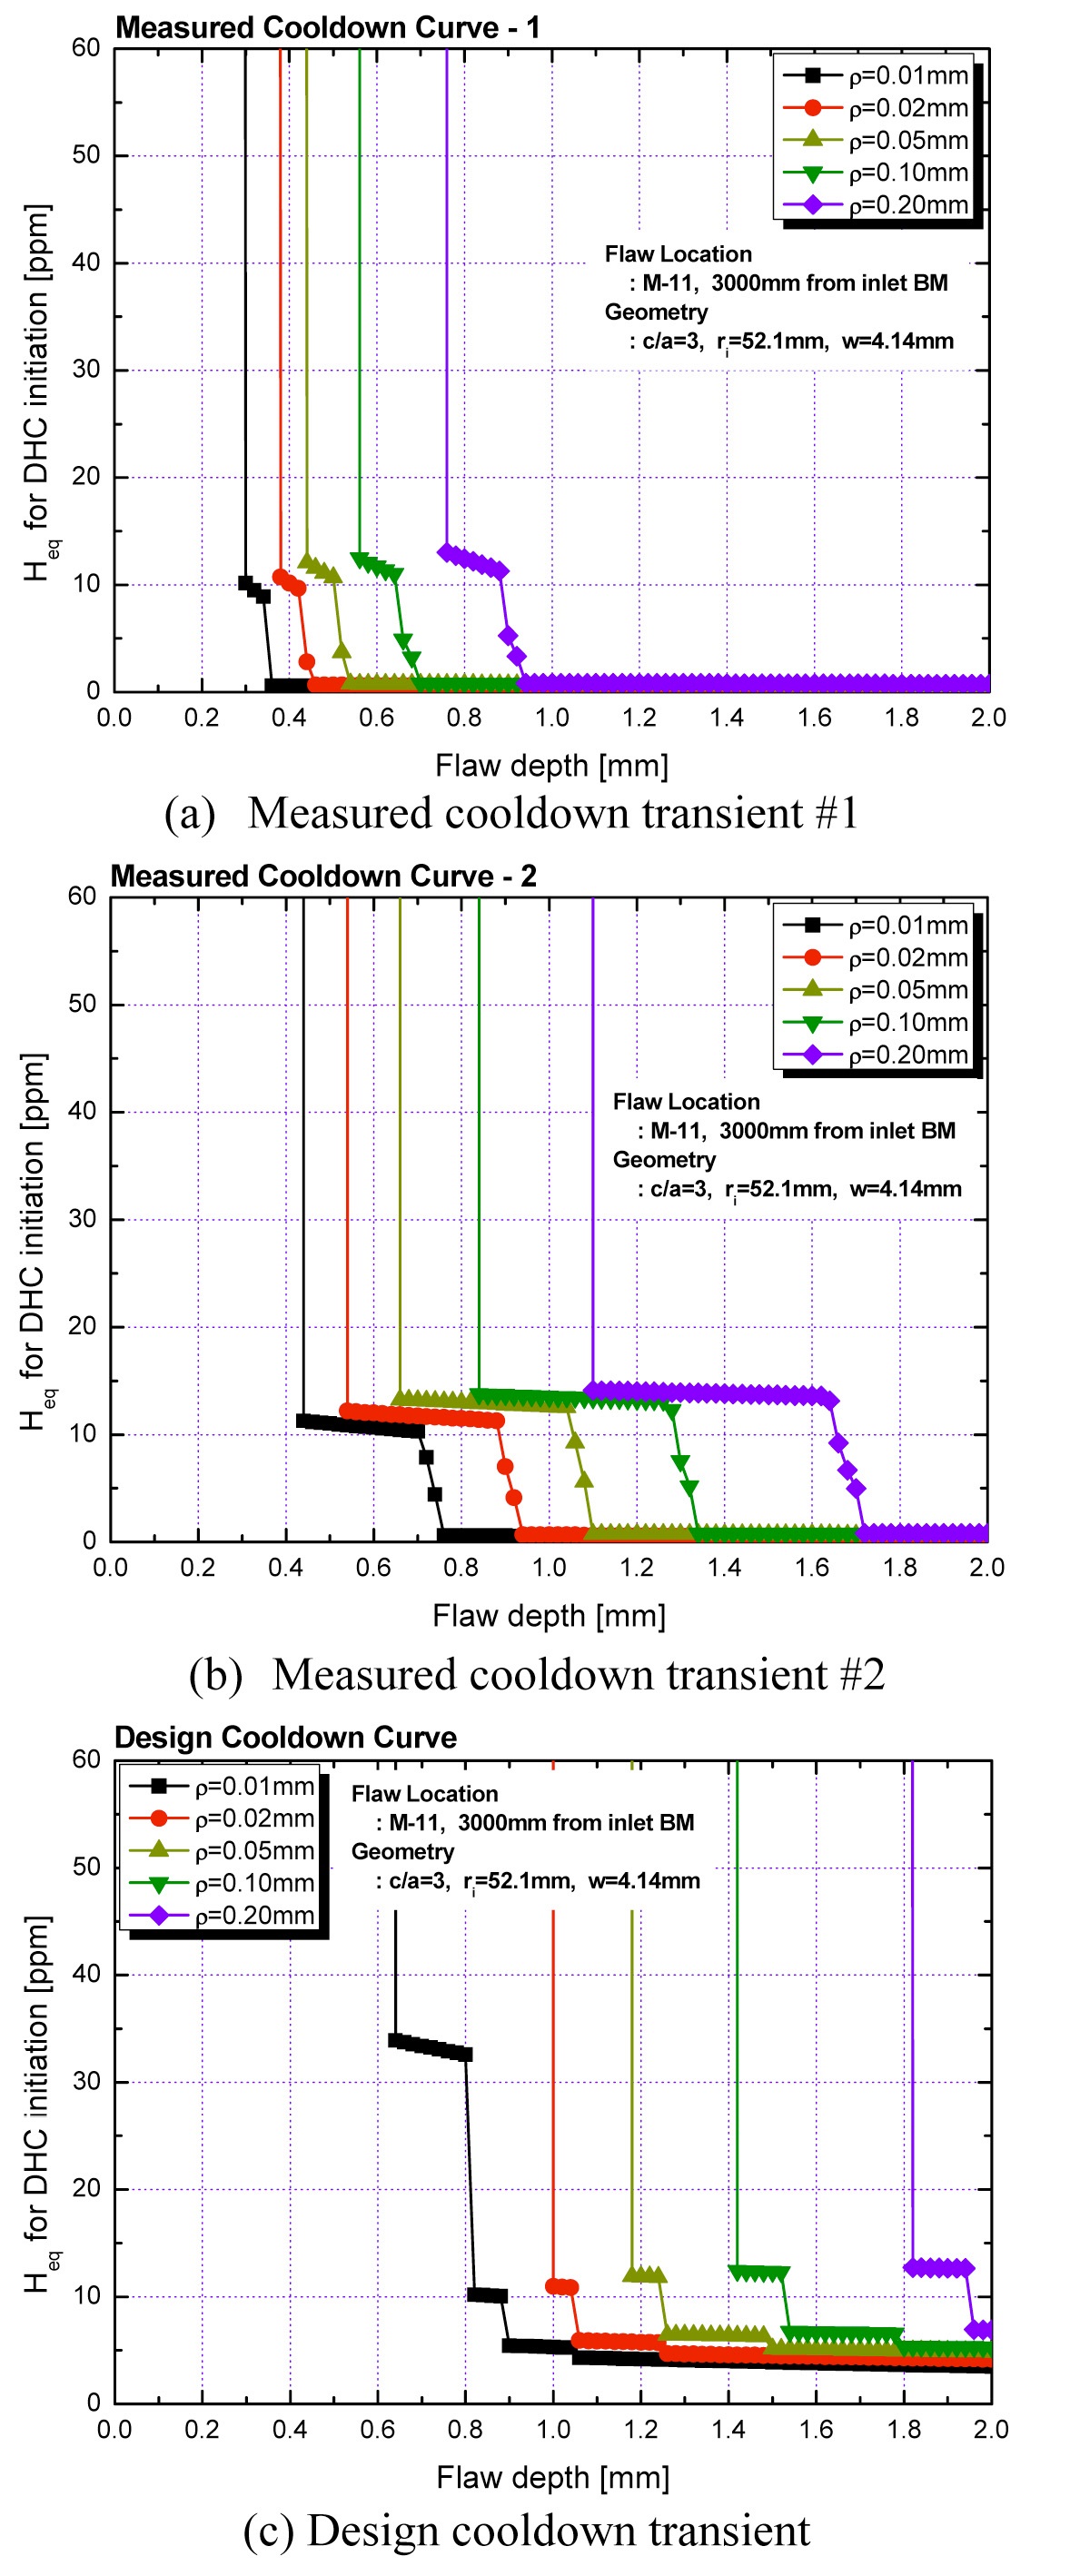 Threshold Bulk Heq for DHC Initiation under Plant Cooldown Transients